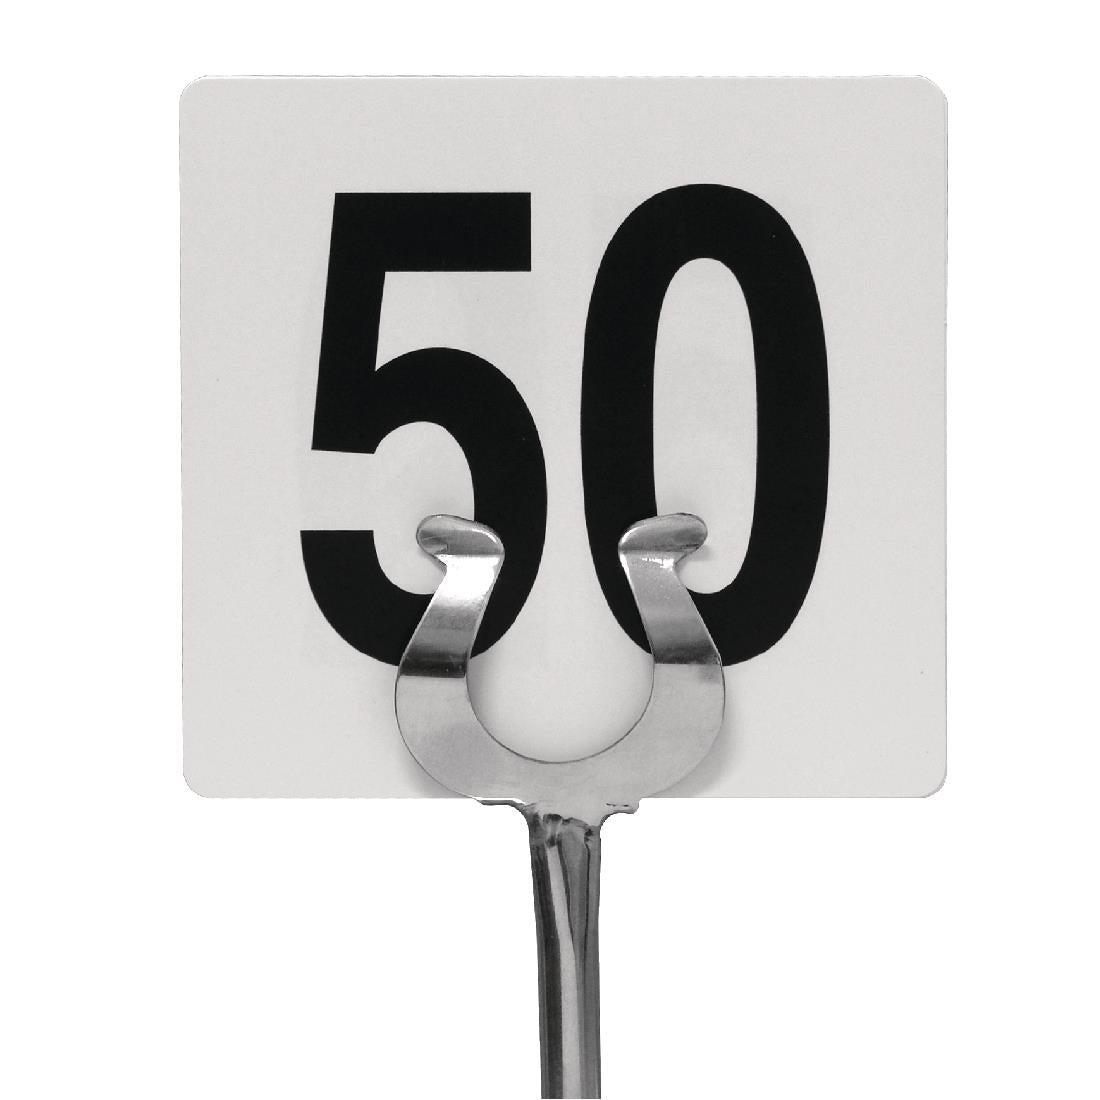 GB629 Plastic Table Number Inserts 1-50 JD Catering Equipment Solutions Ltd